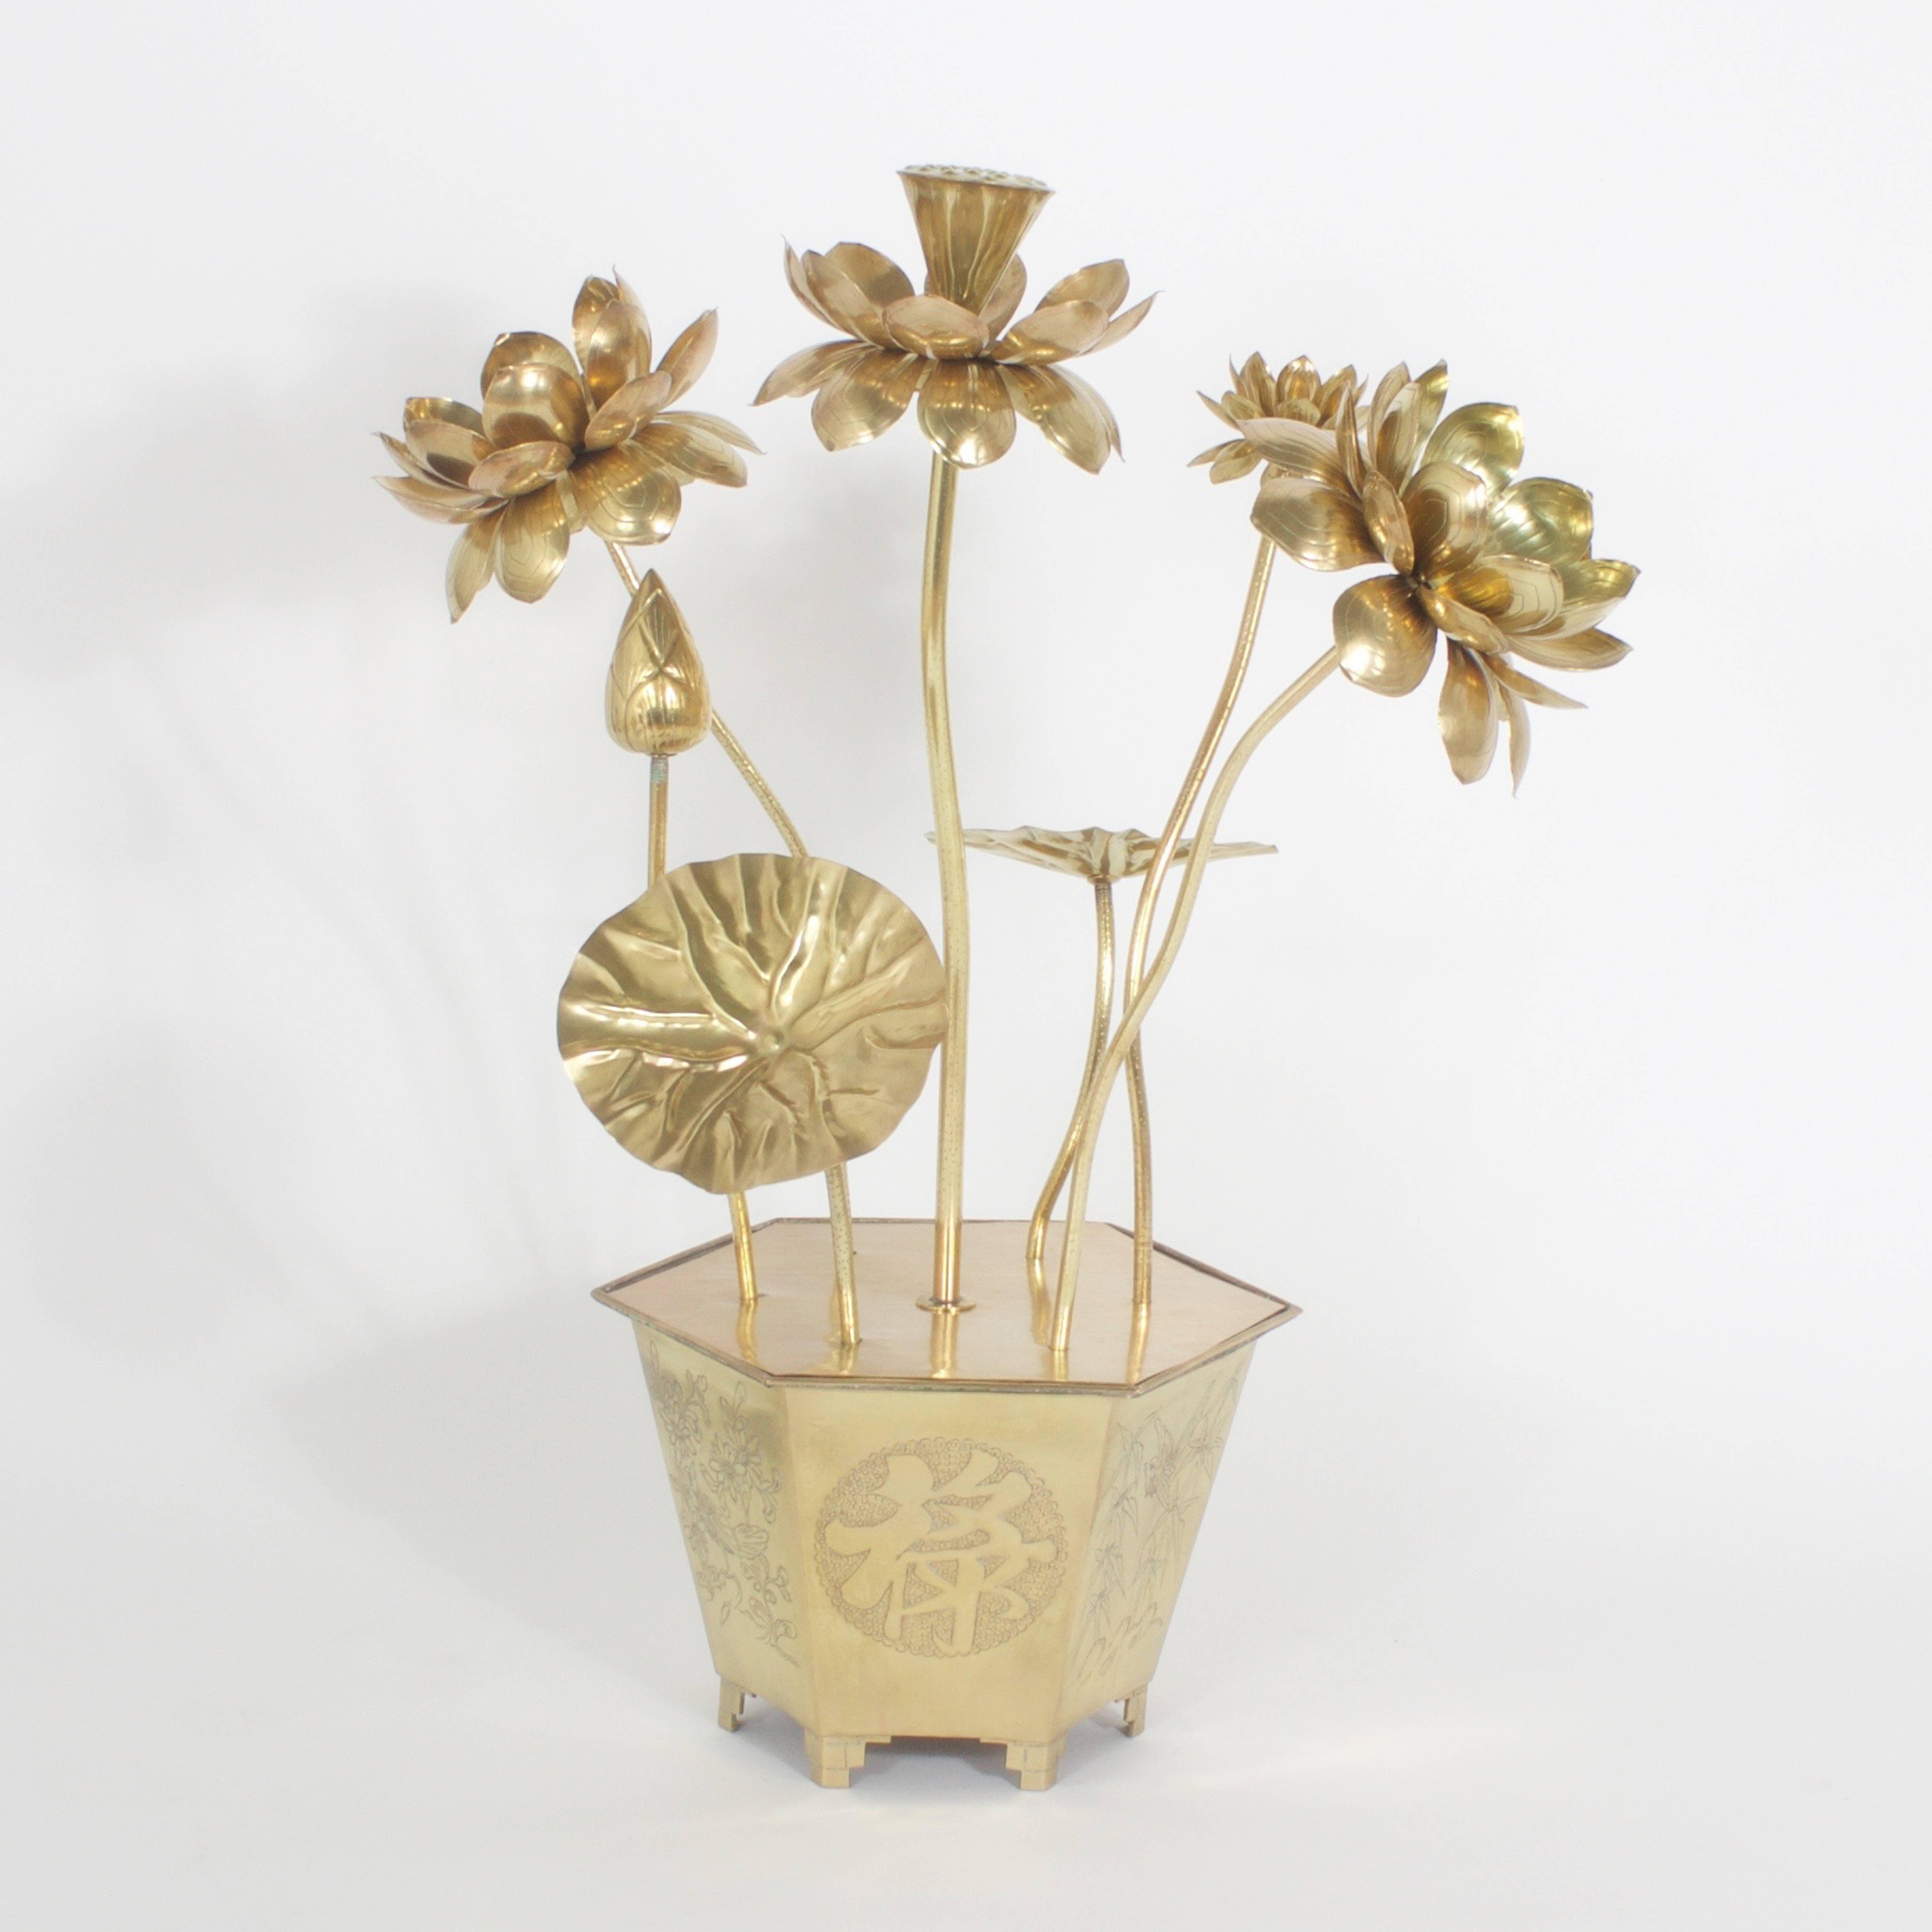 Dramatic pair of Feldmen brass lotus sculptures with flowers in assorted stages of blooming. Set in chinoiserie inspired planters with Chinese characters and floral scenes set on Art Deco style feet. Exceptional size and form. Newly polished.